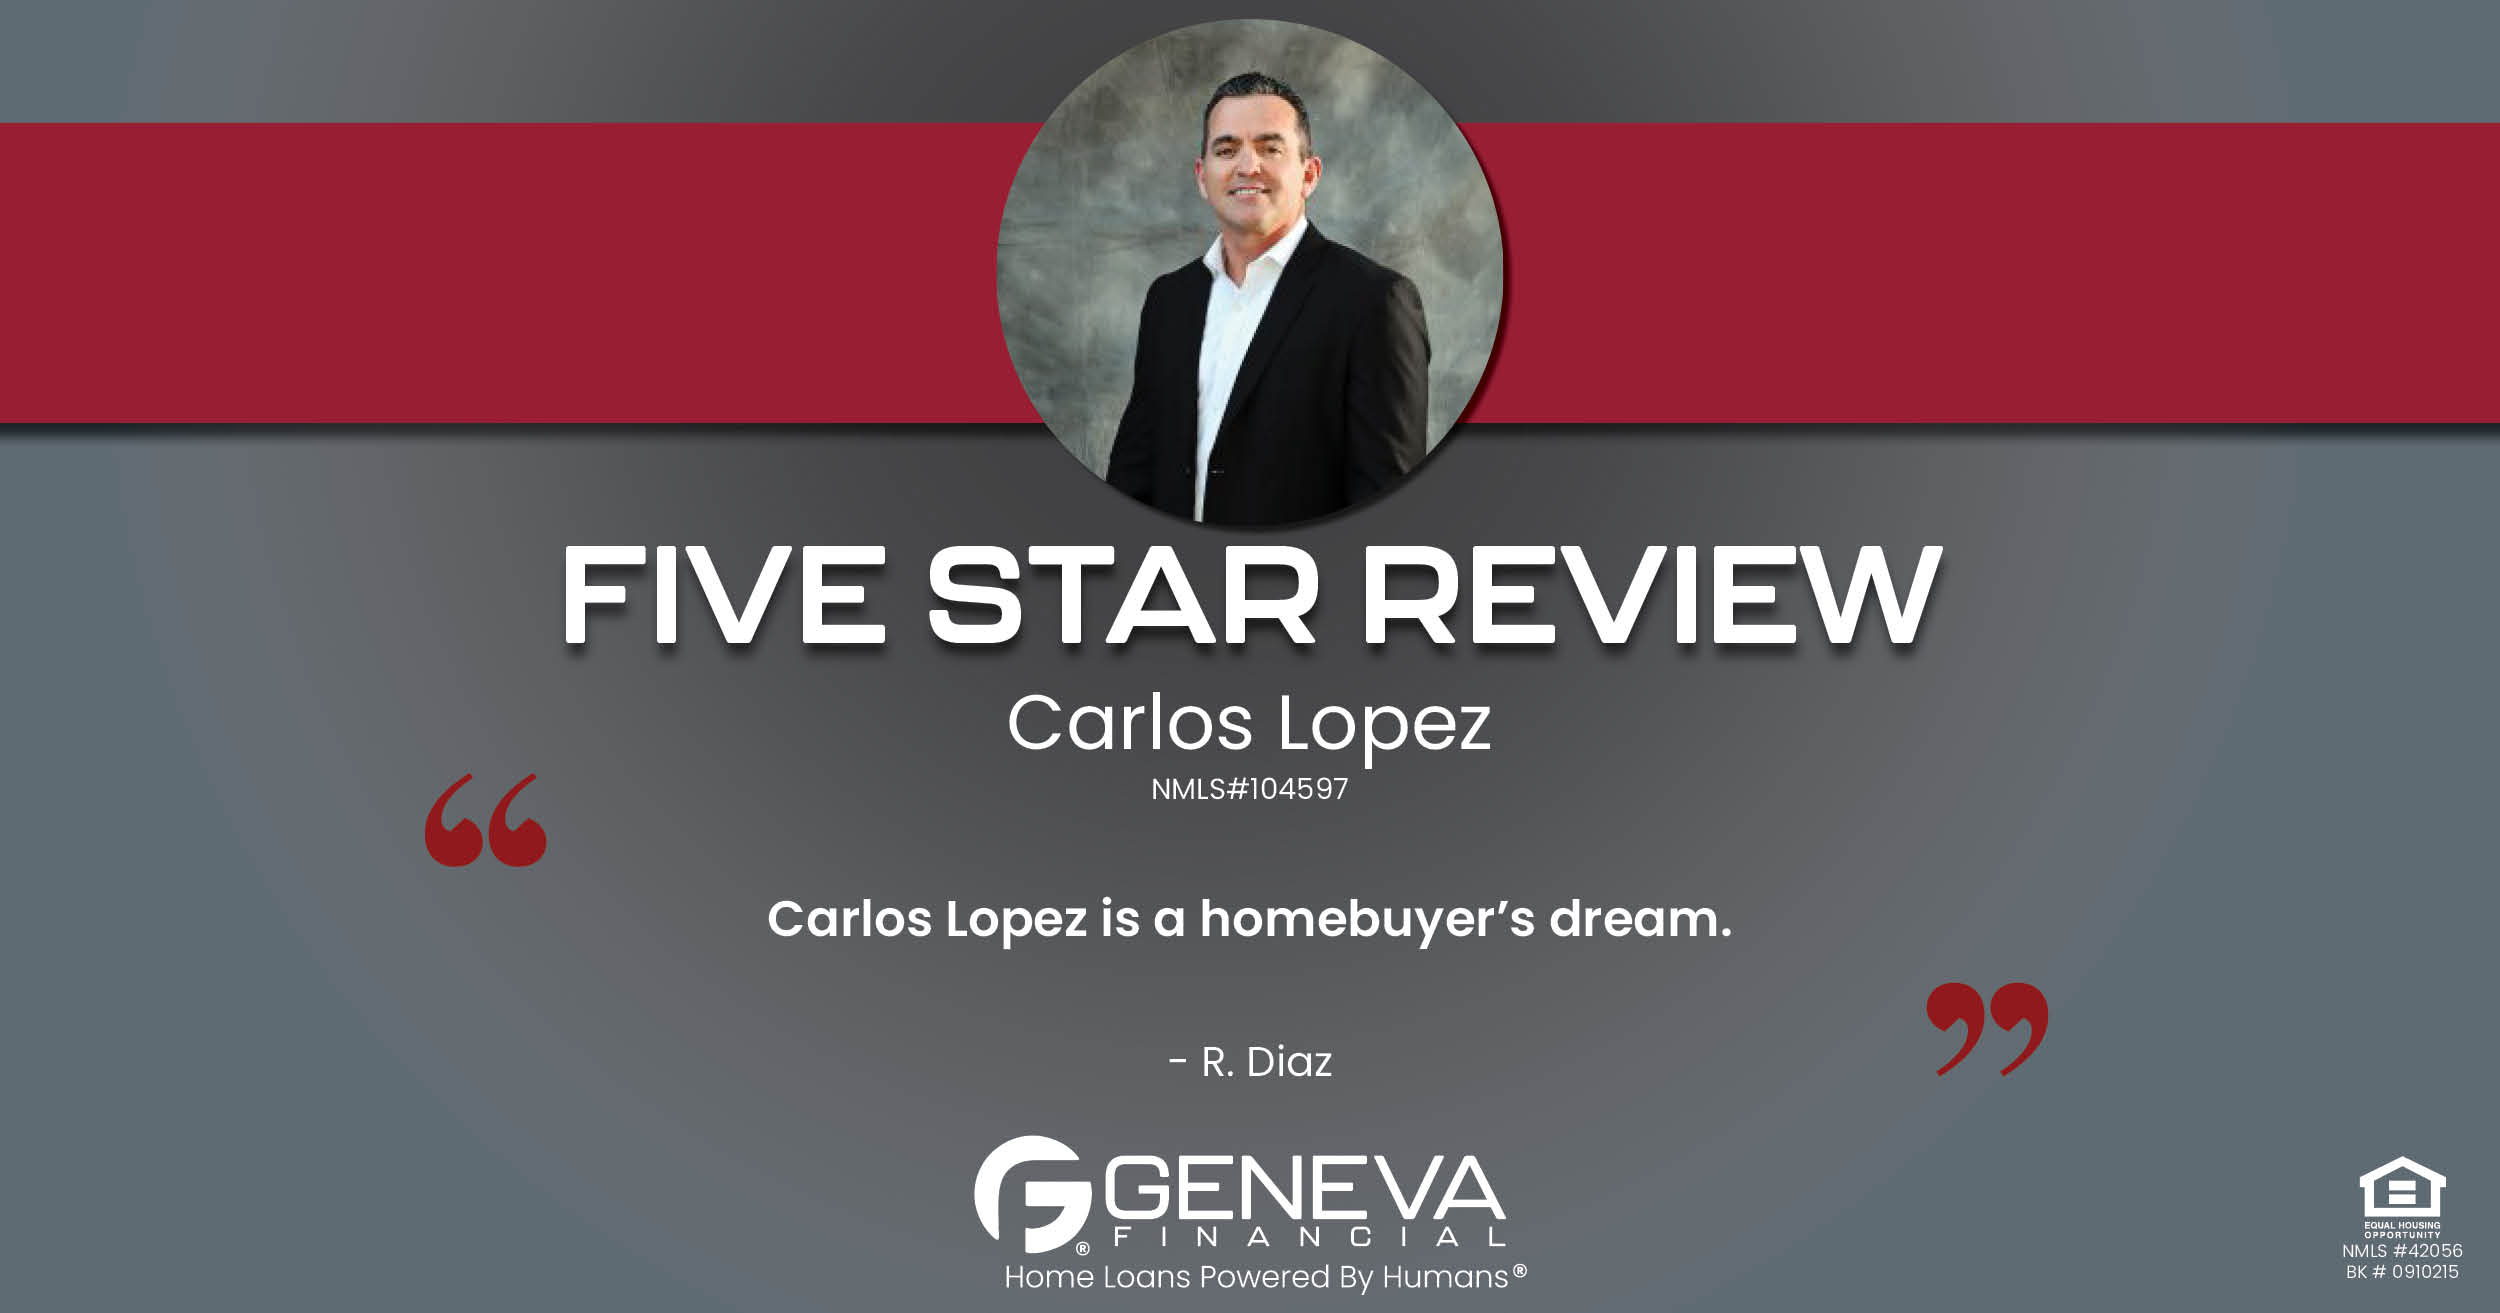 5 Star Review for Luis Guajardo, Licensed Mortgage Loan Officer with Geneva Financial, San Antonio, TX – Home Loans Powered by Humans®.